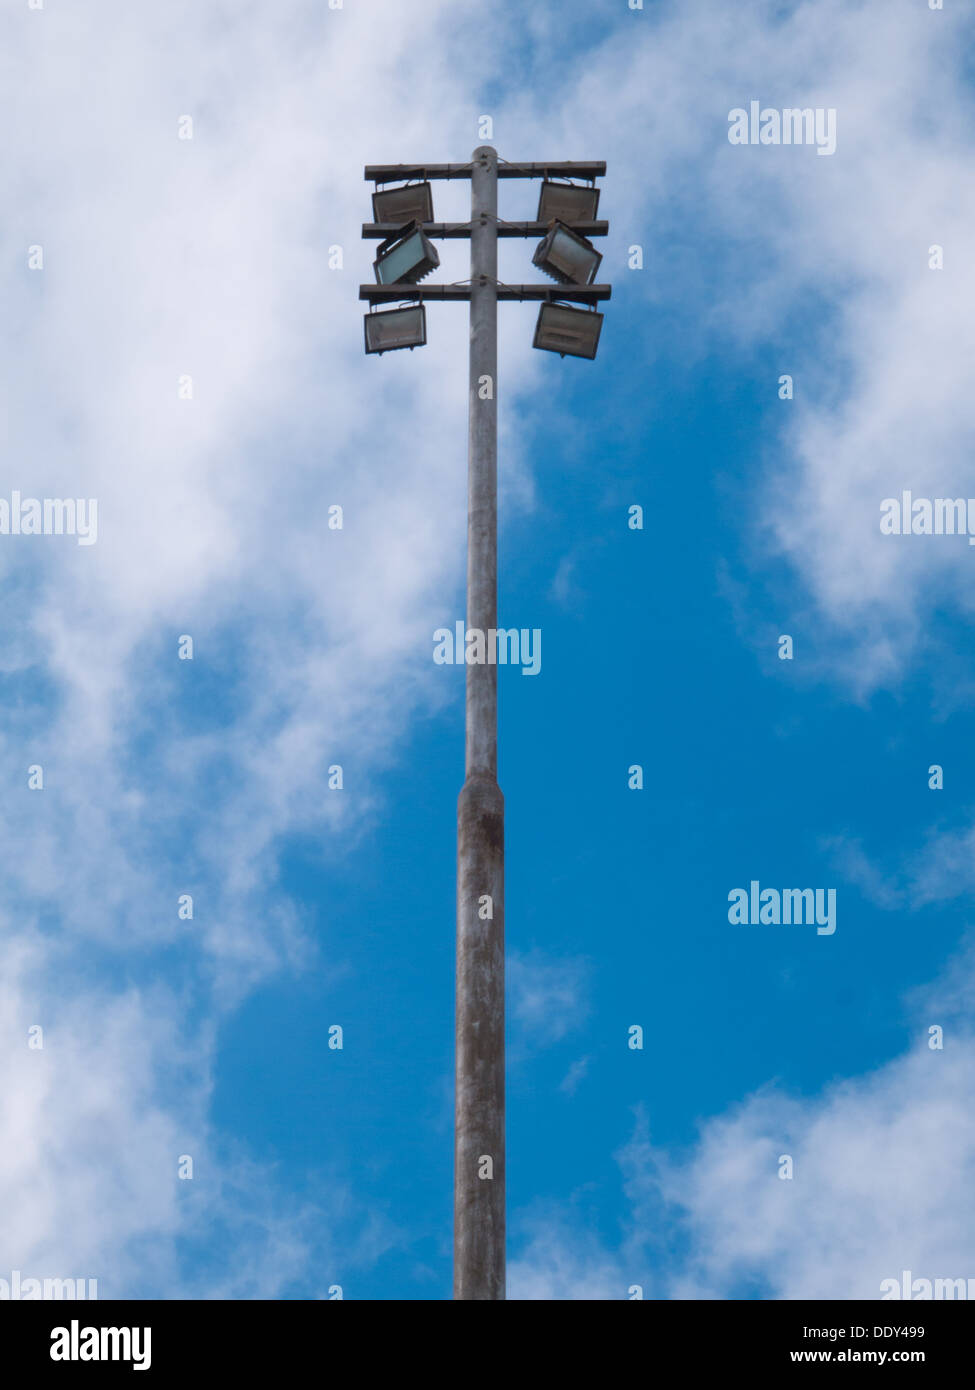 Floodlight from a football fields set against a blue sky with some white clouds. Stock Photo